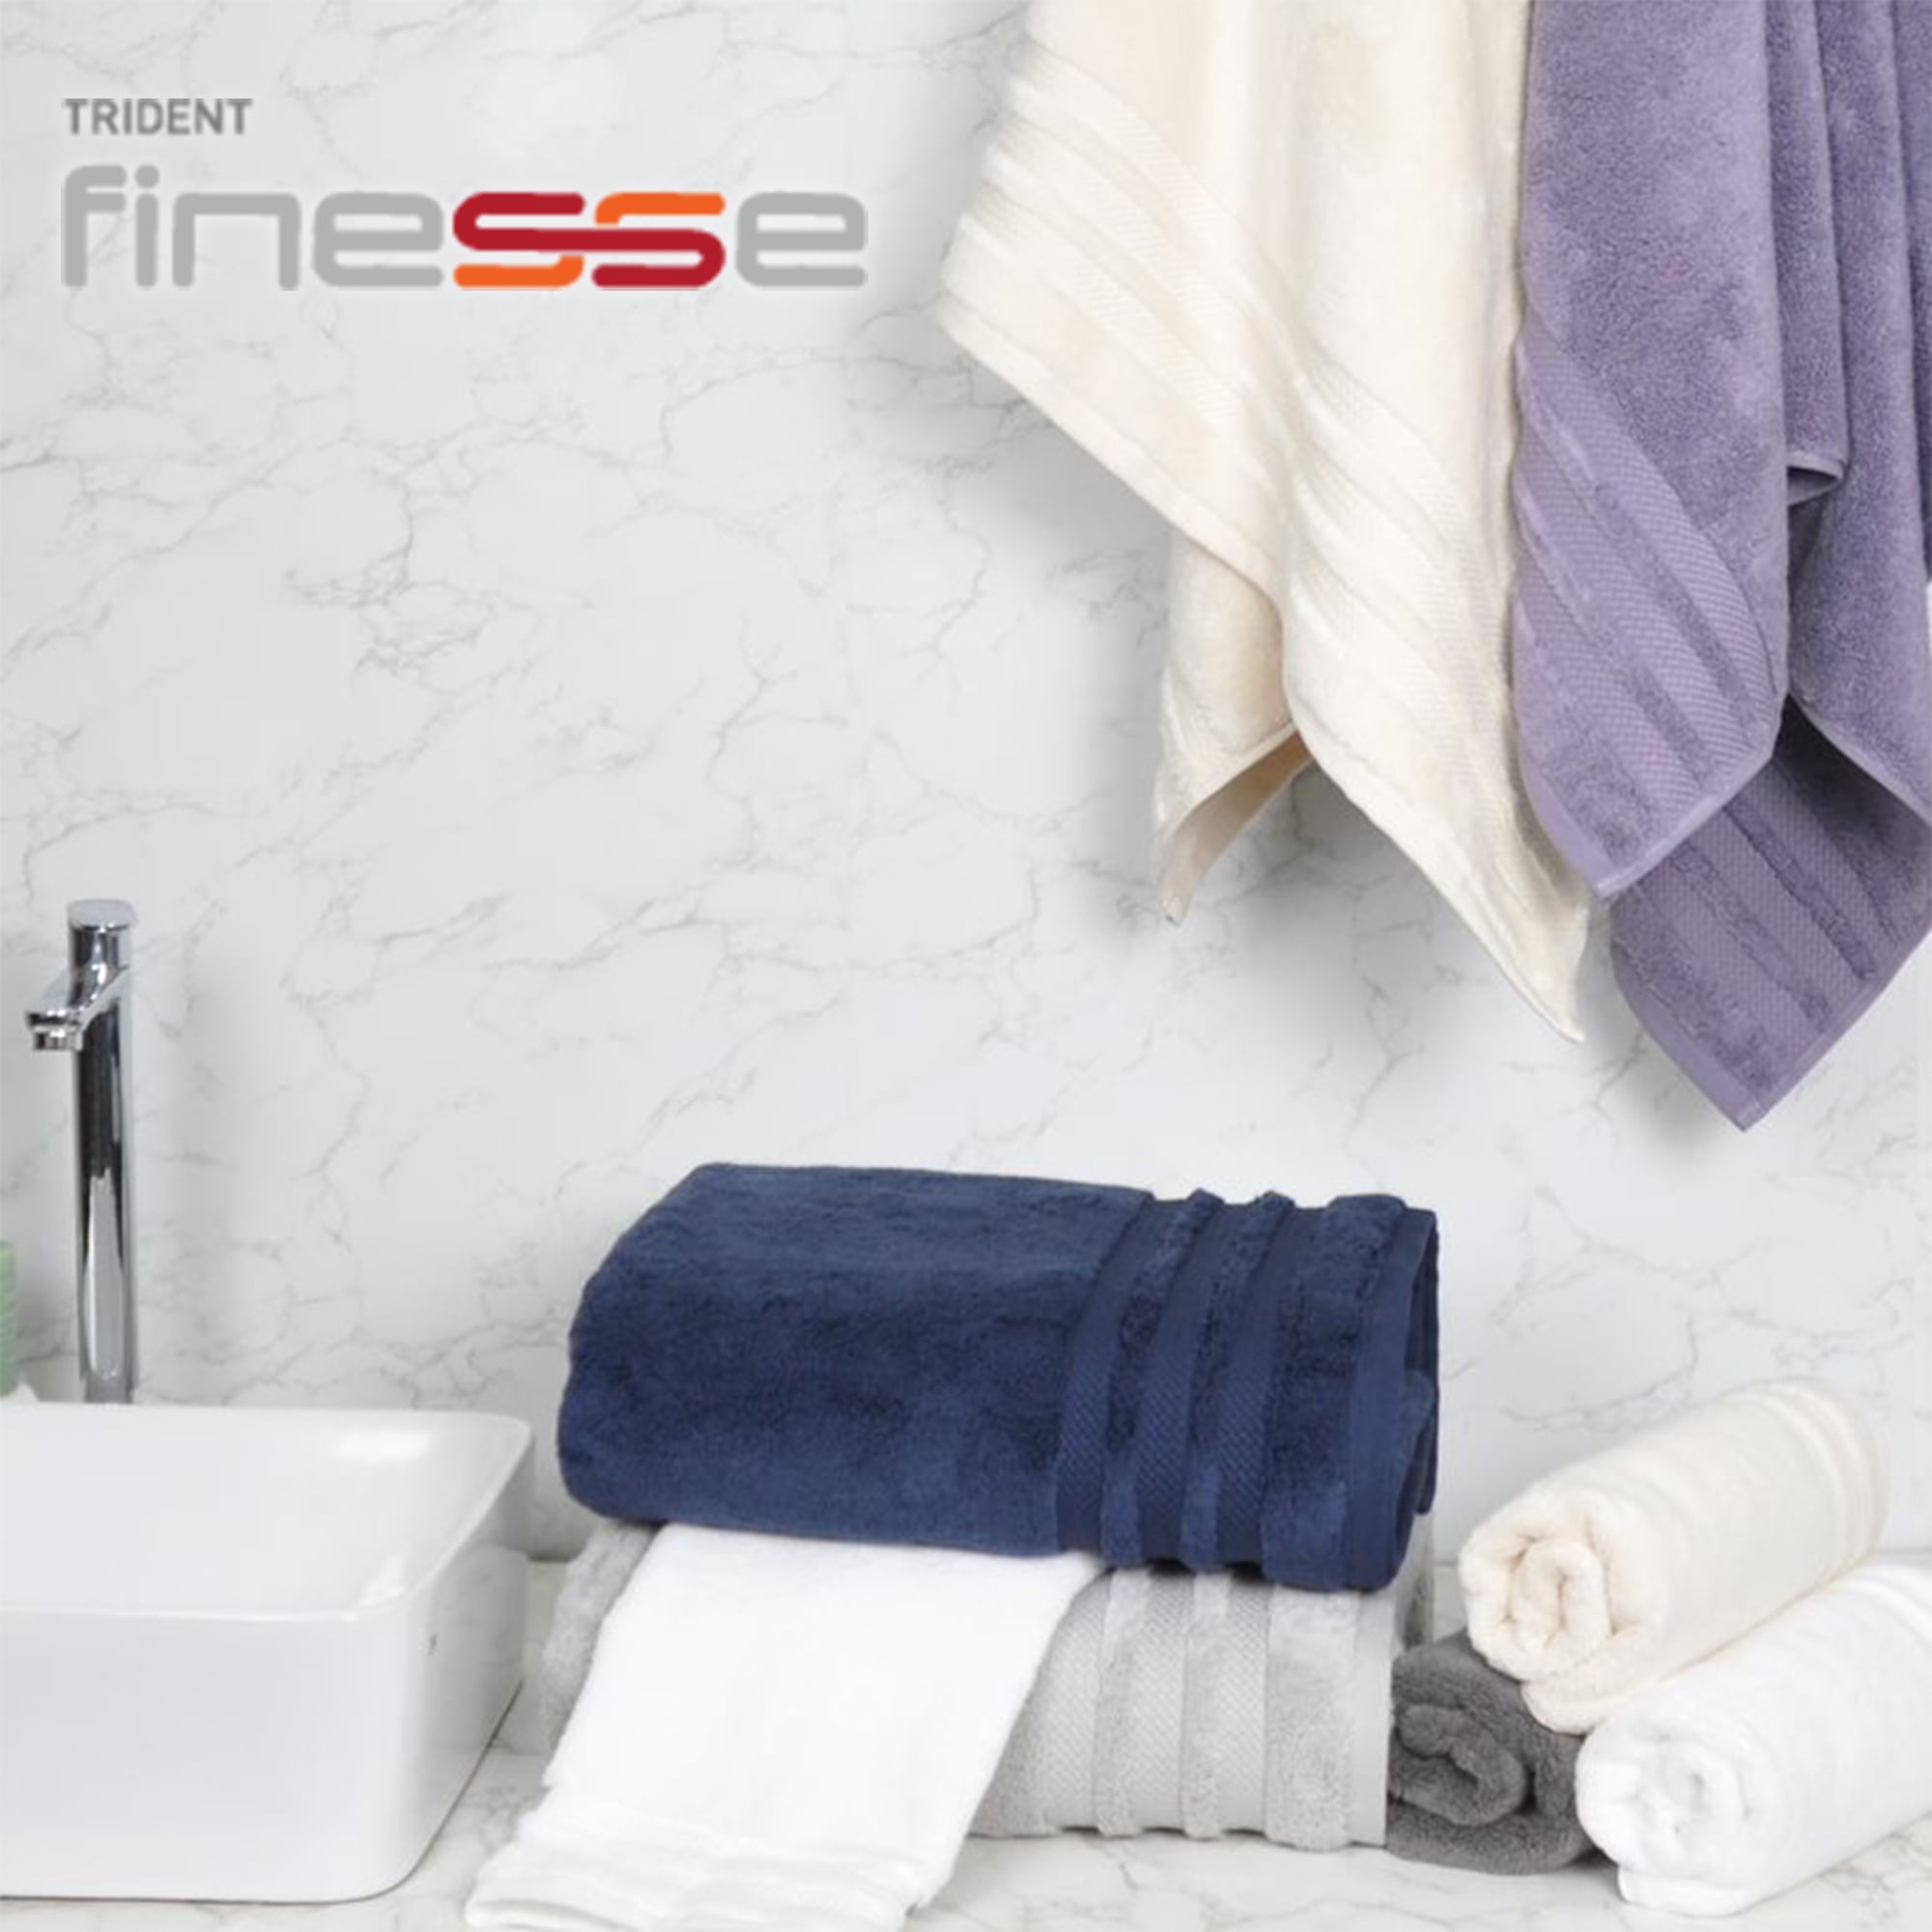 SEISSO Bath Towels, Extra Absorbent & Quick Drying Towels for Bathroom,  Viscose Made from Bamboo Soft Bath Sheet (35 x 63inch), Premium Towel